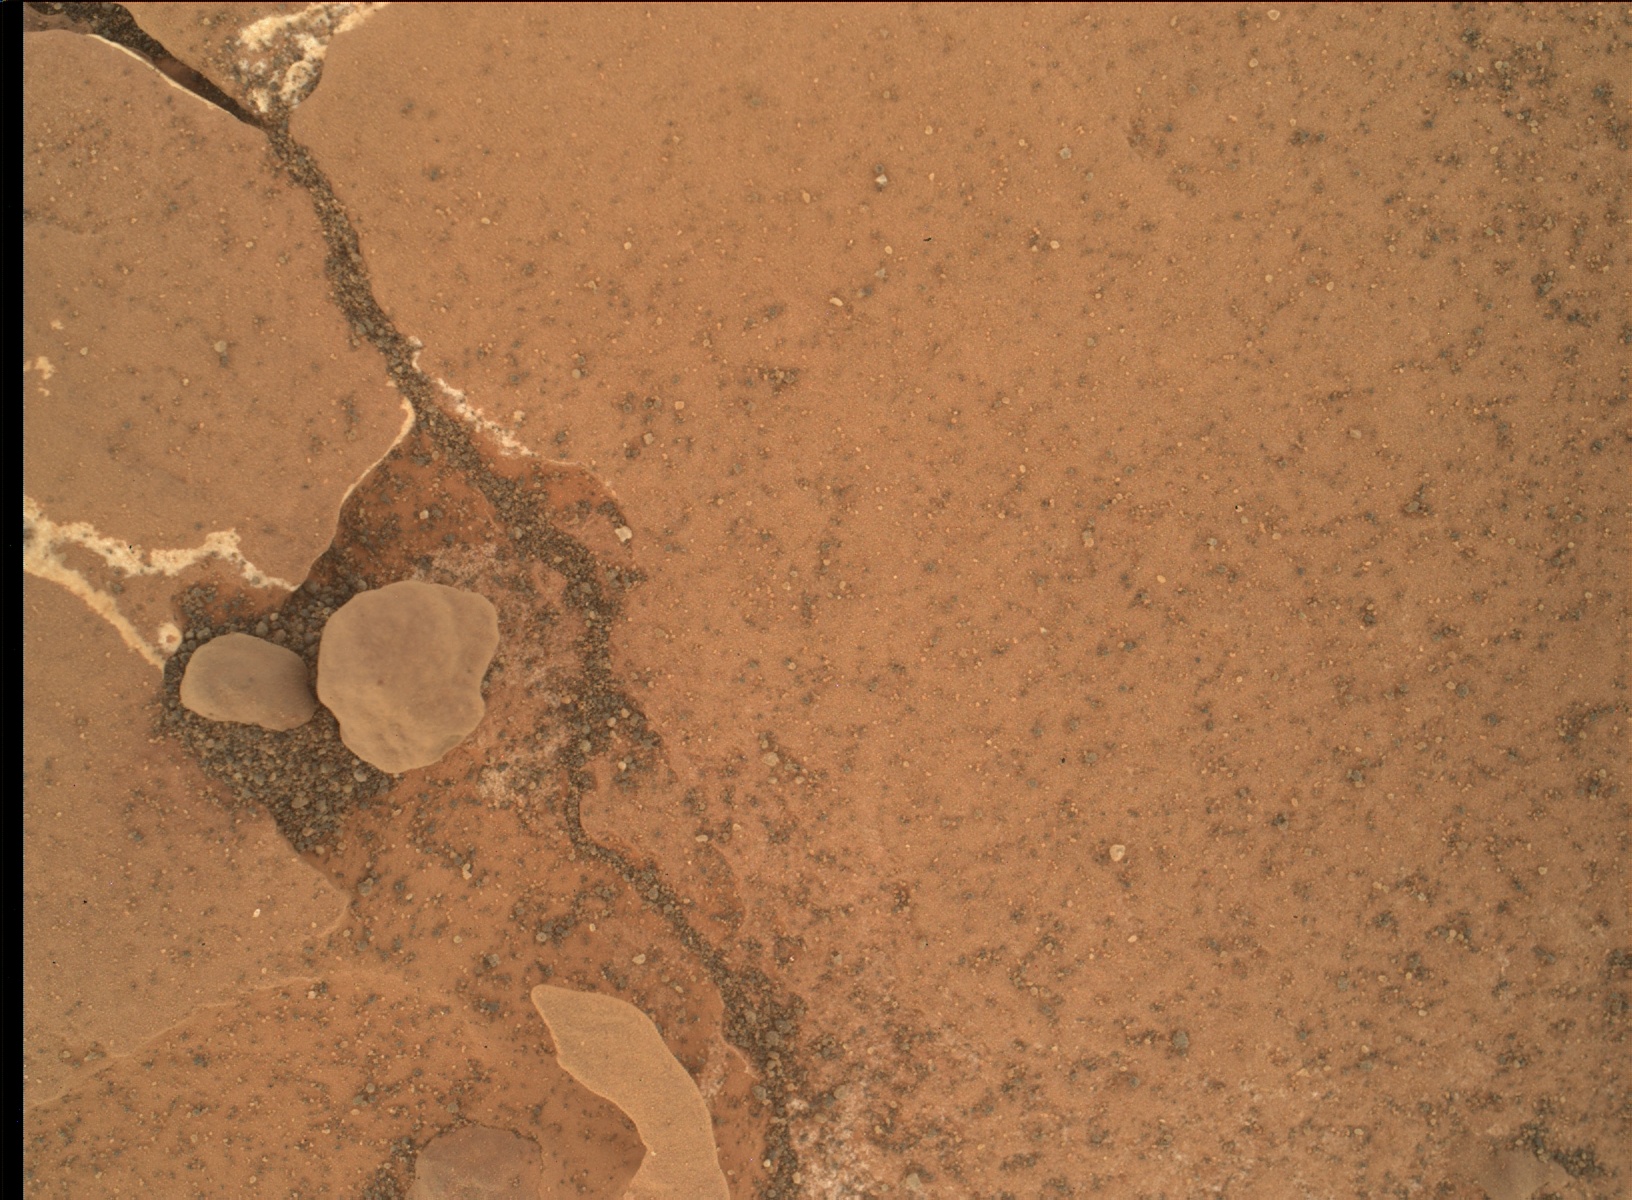 Nasa's Mars rover Curiosity acquired this image using its Mars Hand Lens Imager (MAHLI) on Sol 1782